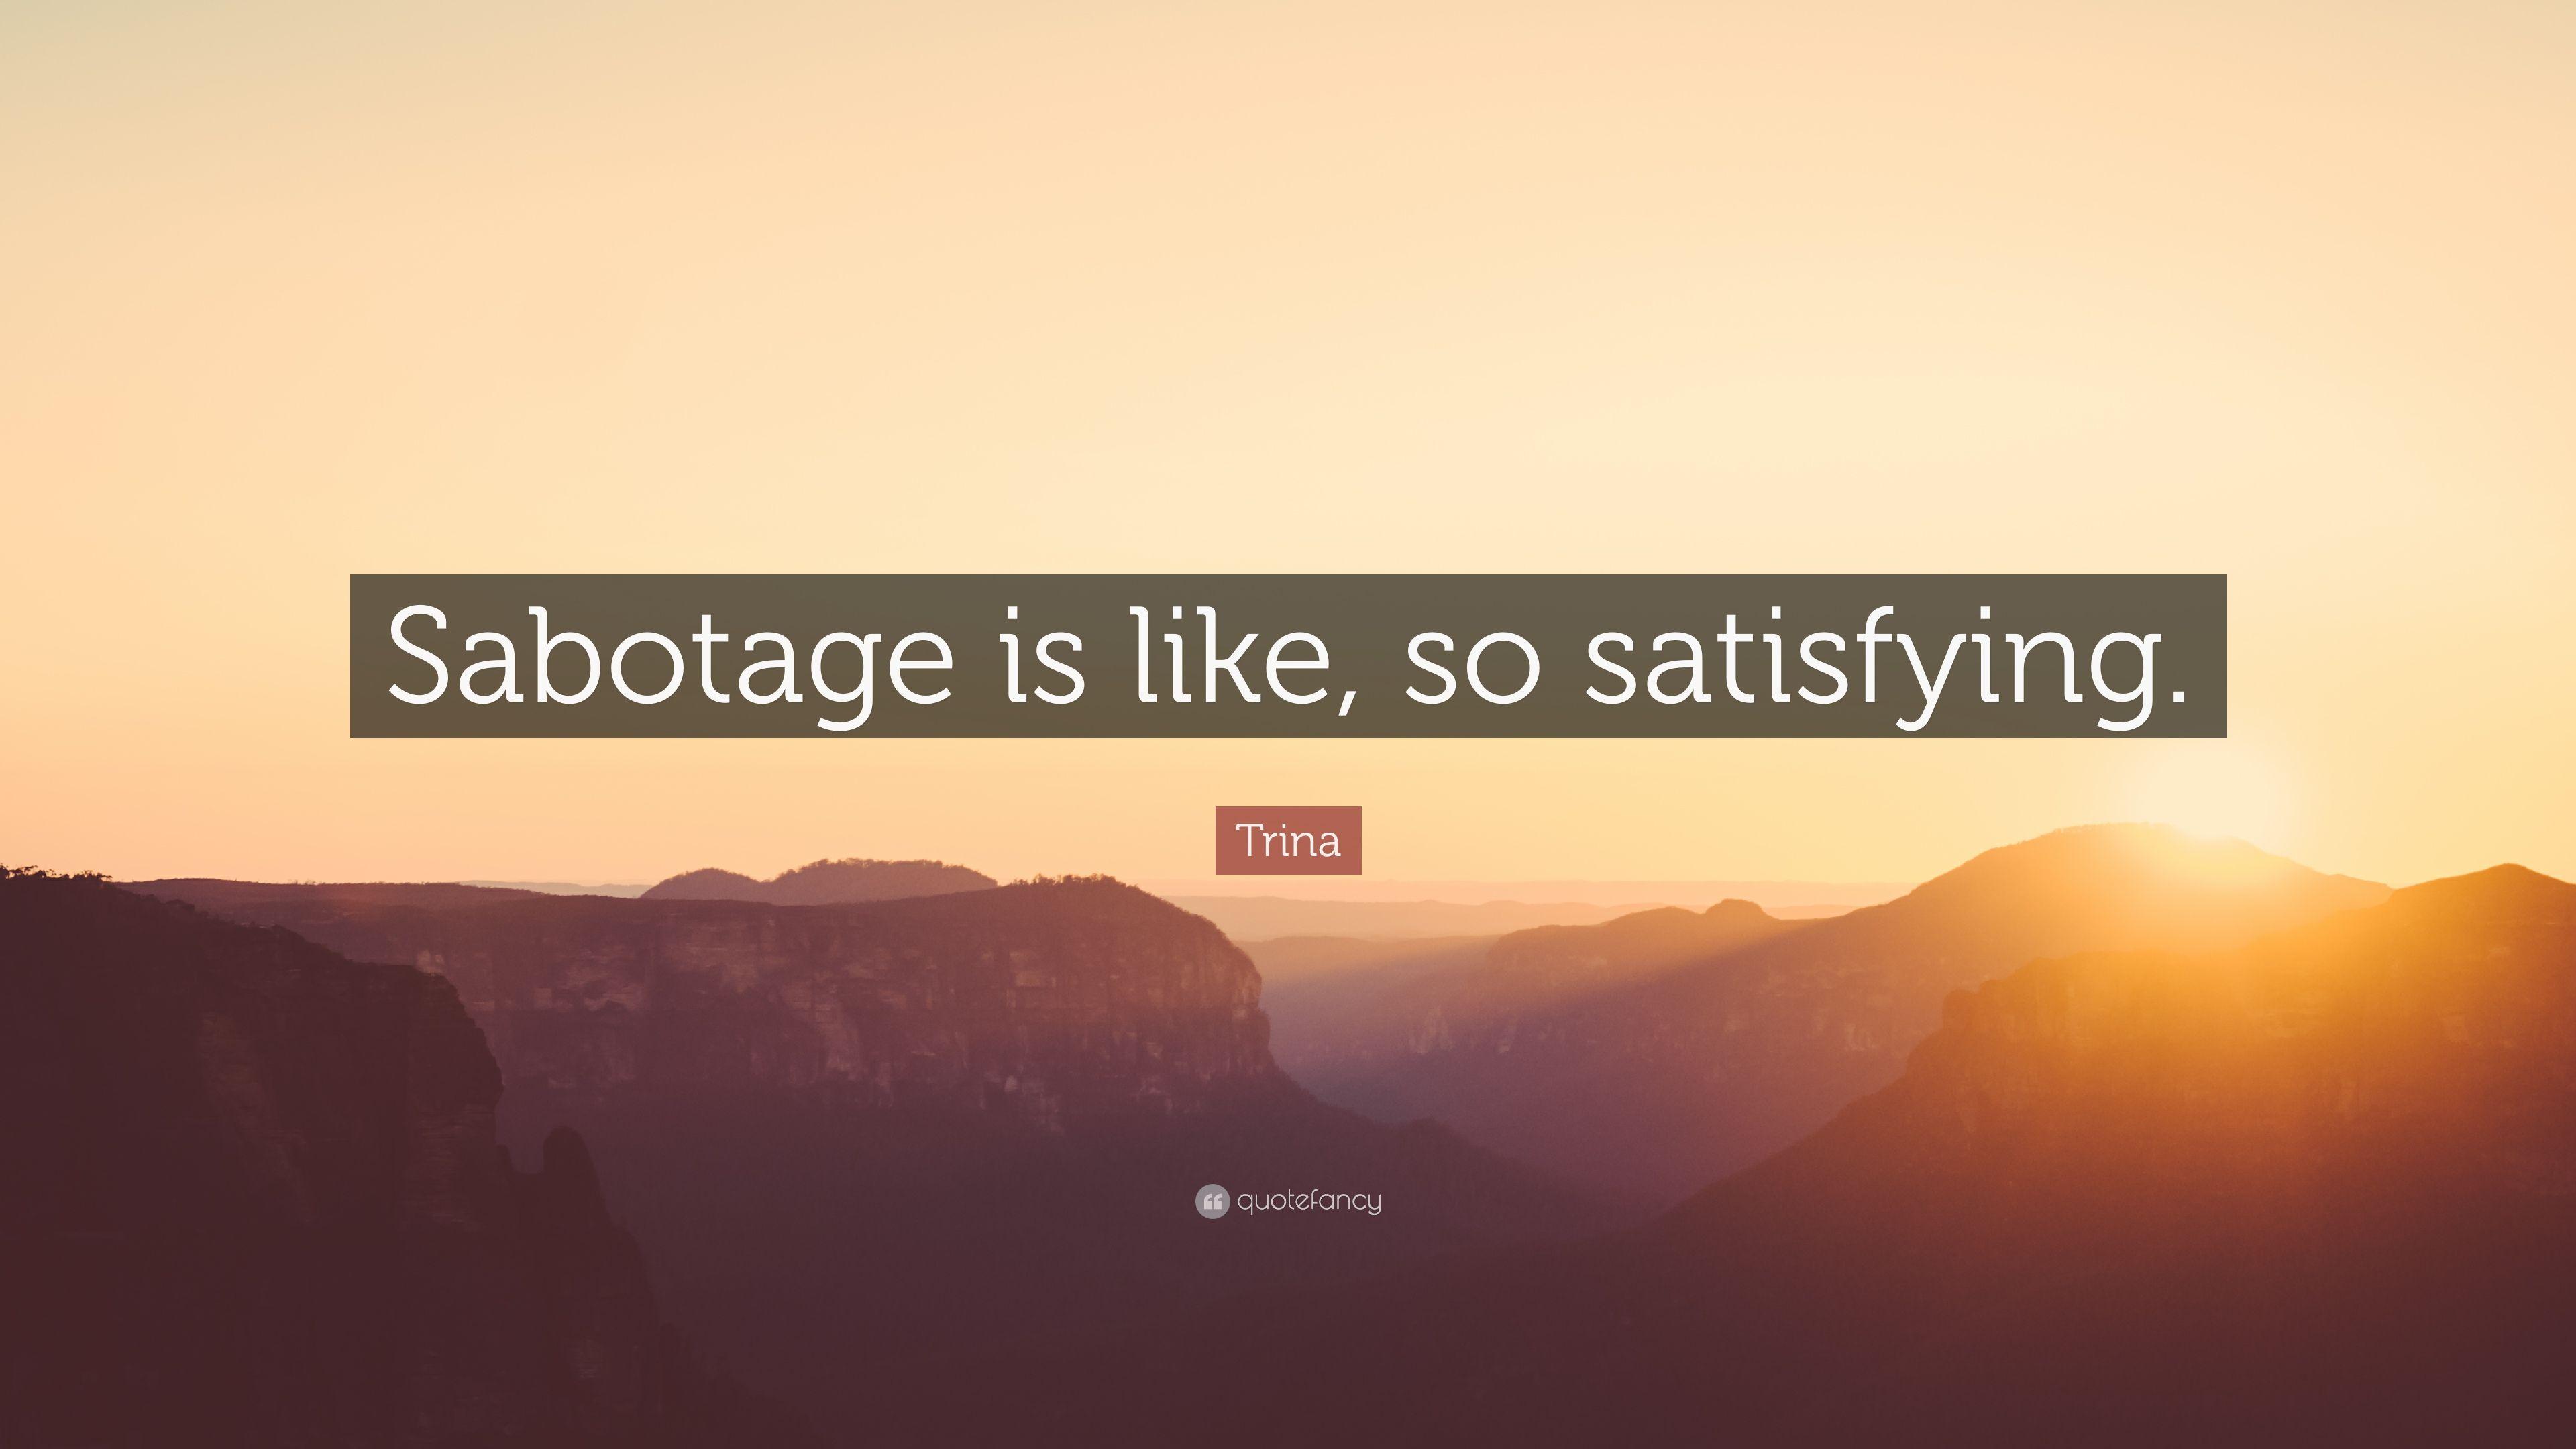 Trina Quote: “Sabotage is like, so satisfying.” 7 wallpaper